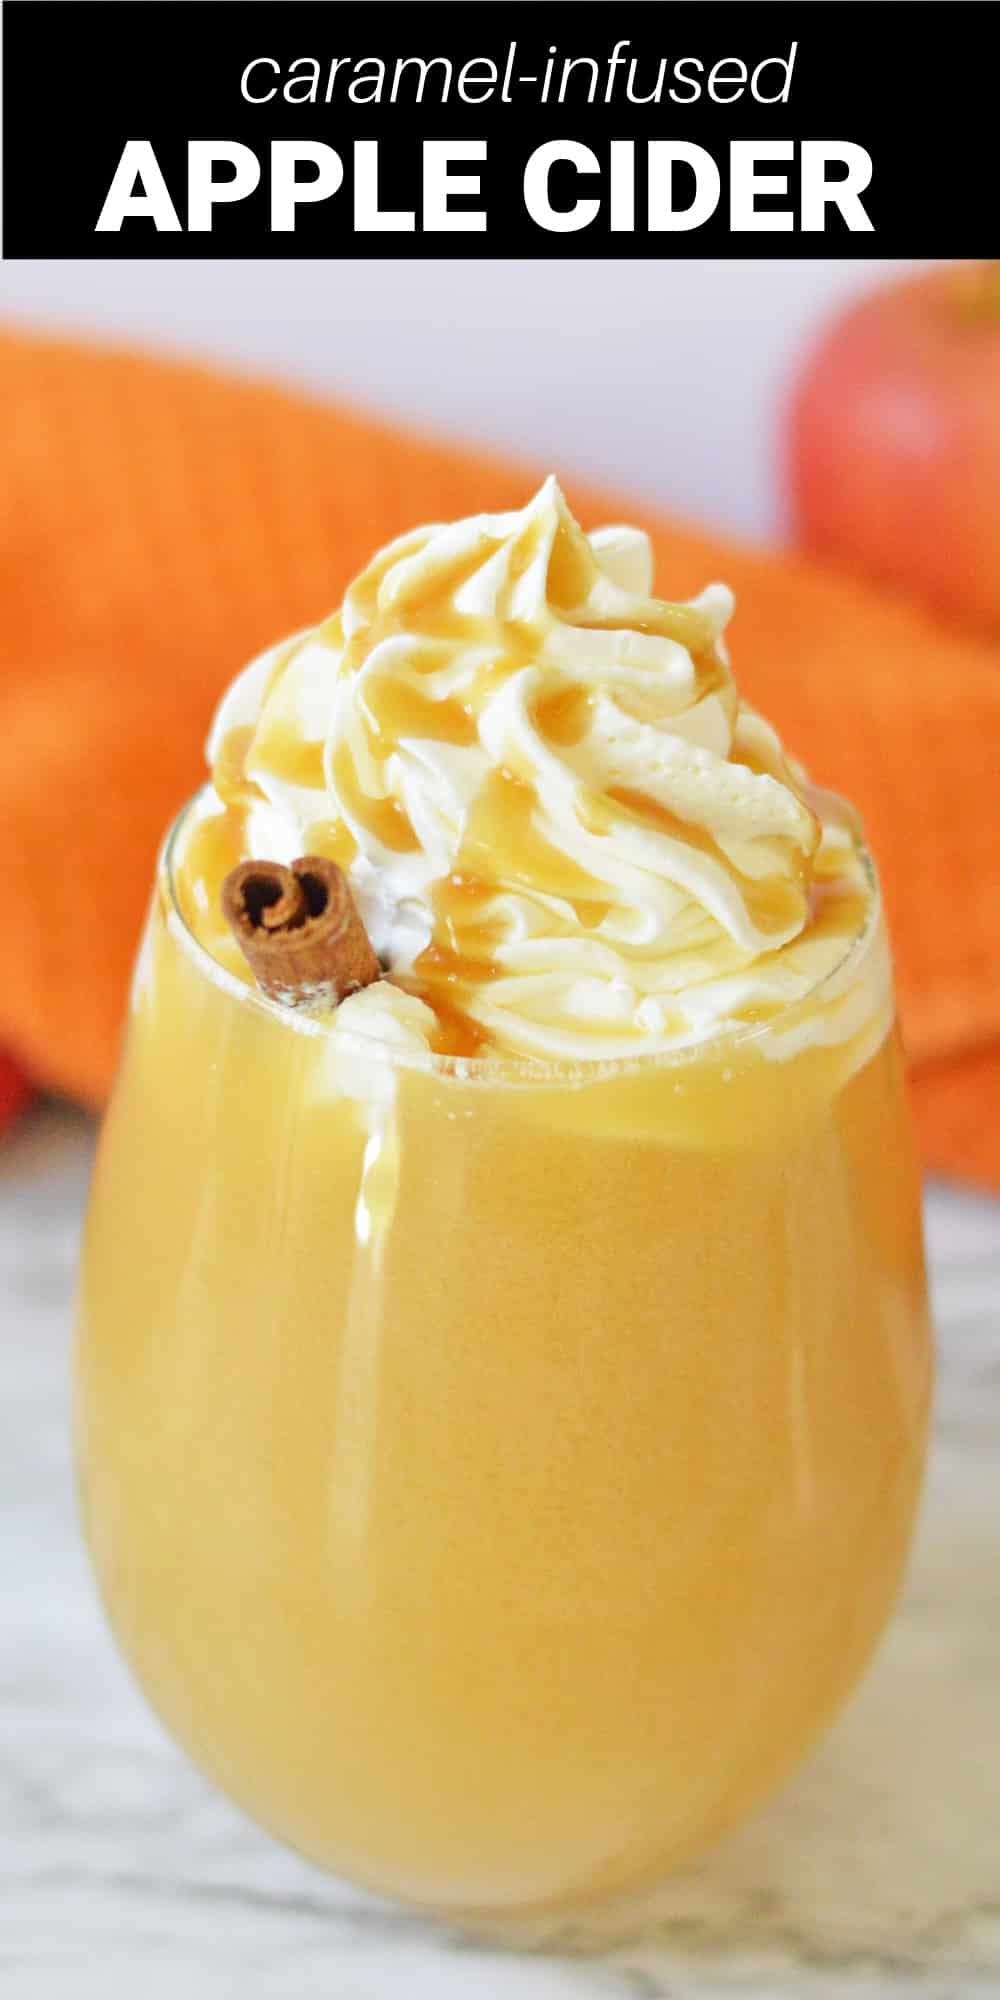 This caramel apple cider is a warm and comforting taste of fall that you’ll want to enjoy all season long. Fresh apple cider is heated and mixed with rich caramel sauce, then topped with plenty of whipped cream and drizzled with more caramel sauce for a tasty treat that’s both a delicious drink and an indulgent dessert.